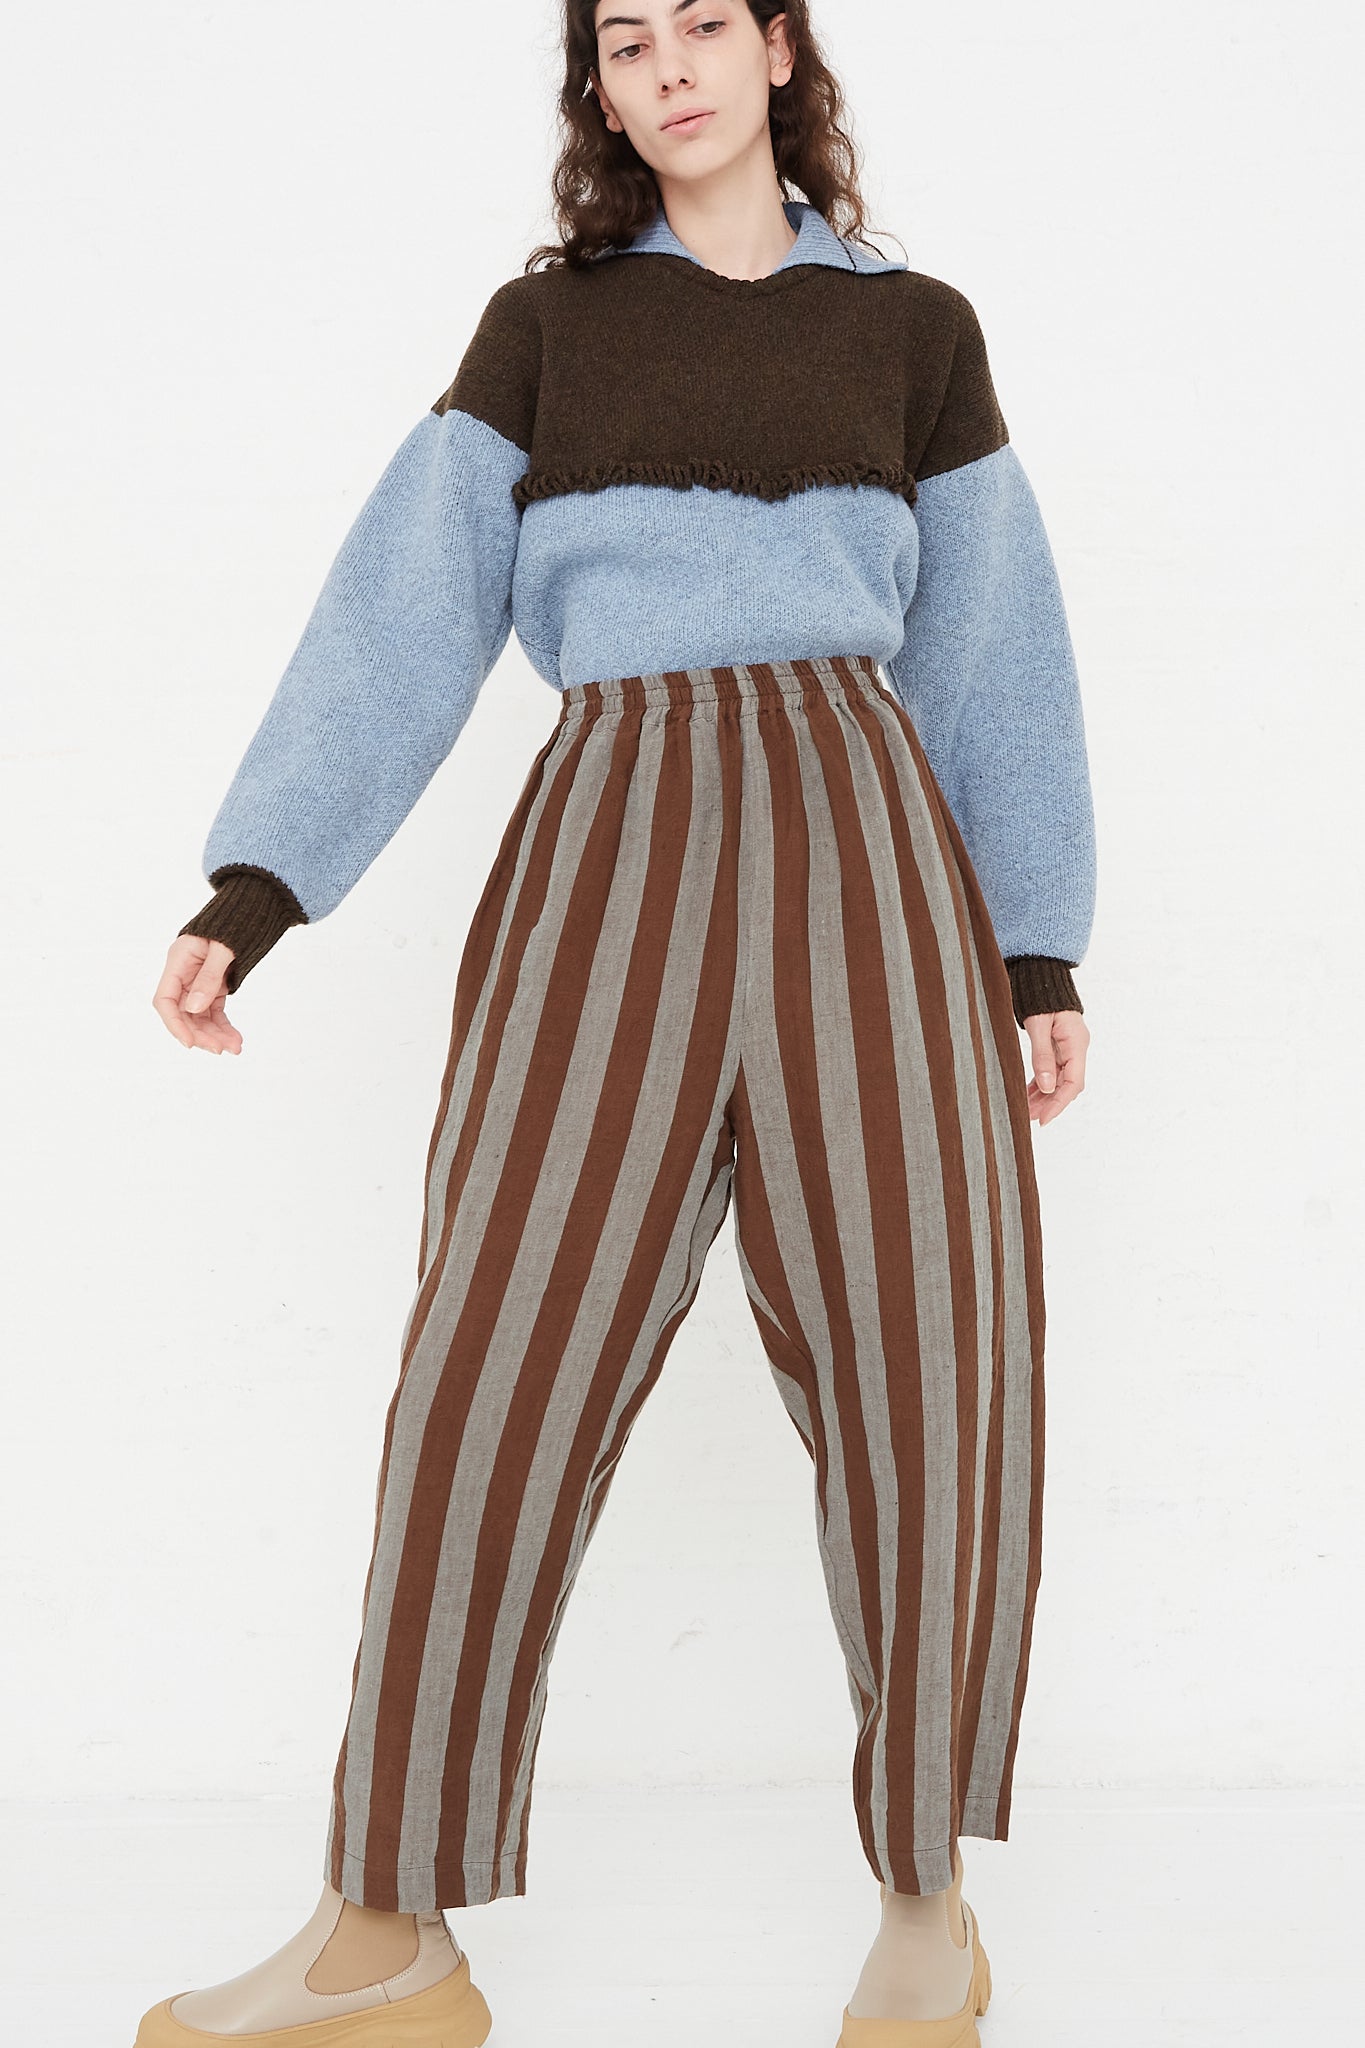 A model wearing a high waist trouser in a striped Irish linen. Brown and blue stripe. Features an elasticated waist and a wide straight leg. Front and full view of model highlight full pant, sweater and boots. Designed by Cawley - Oroboro Store